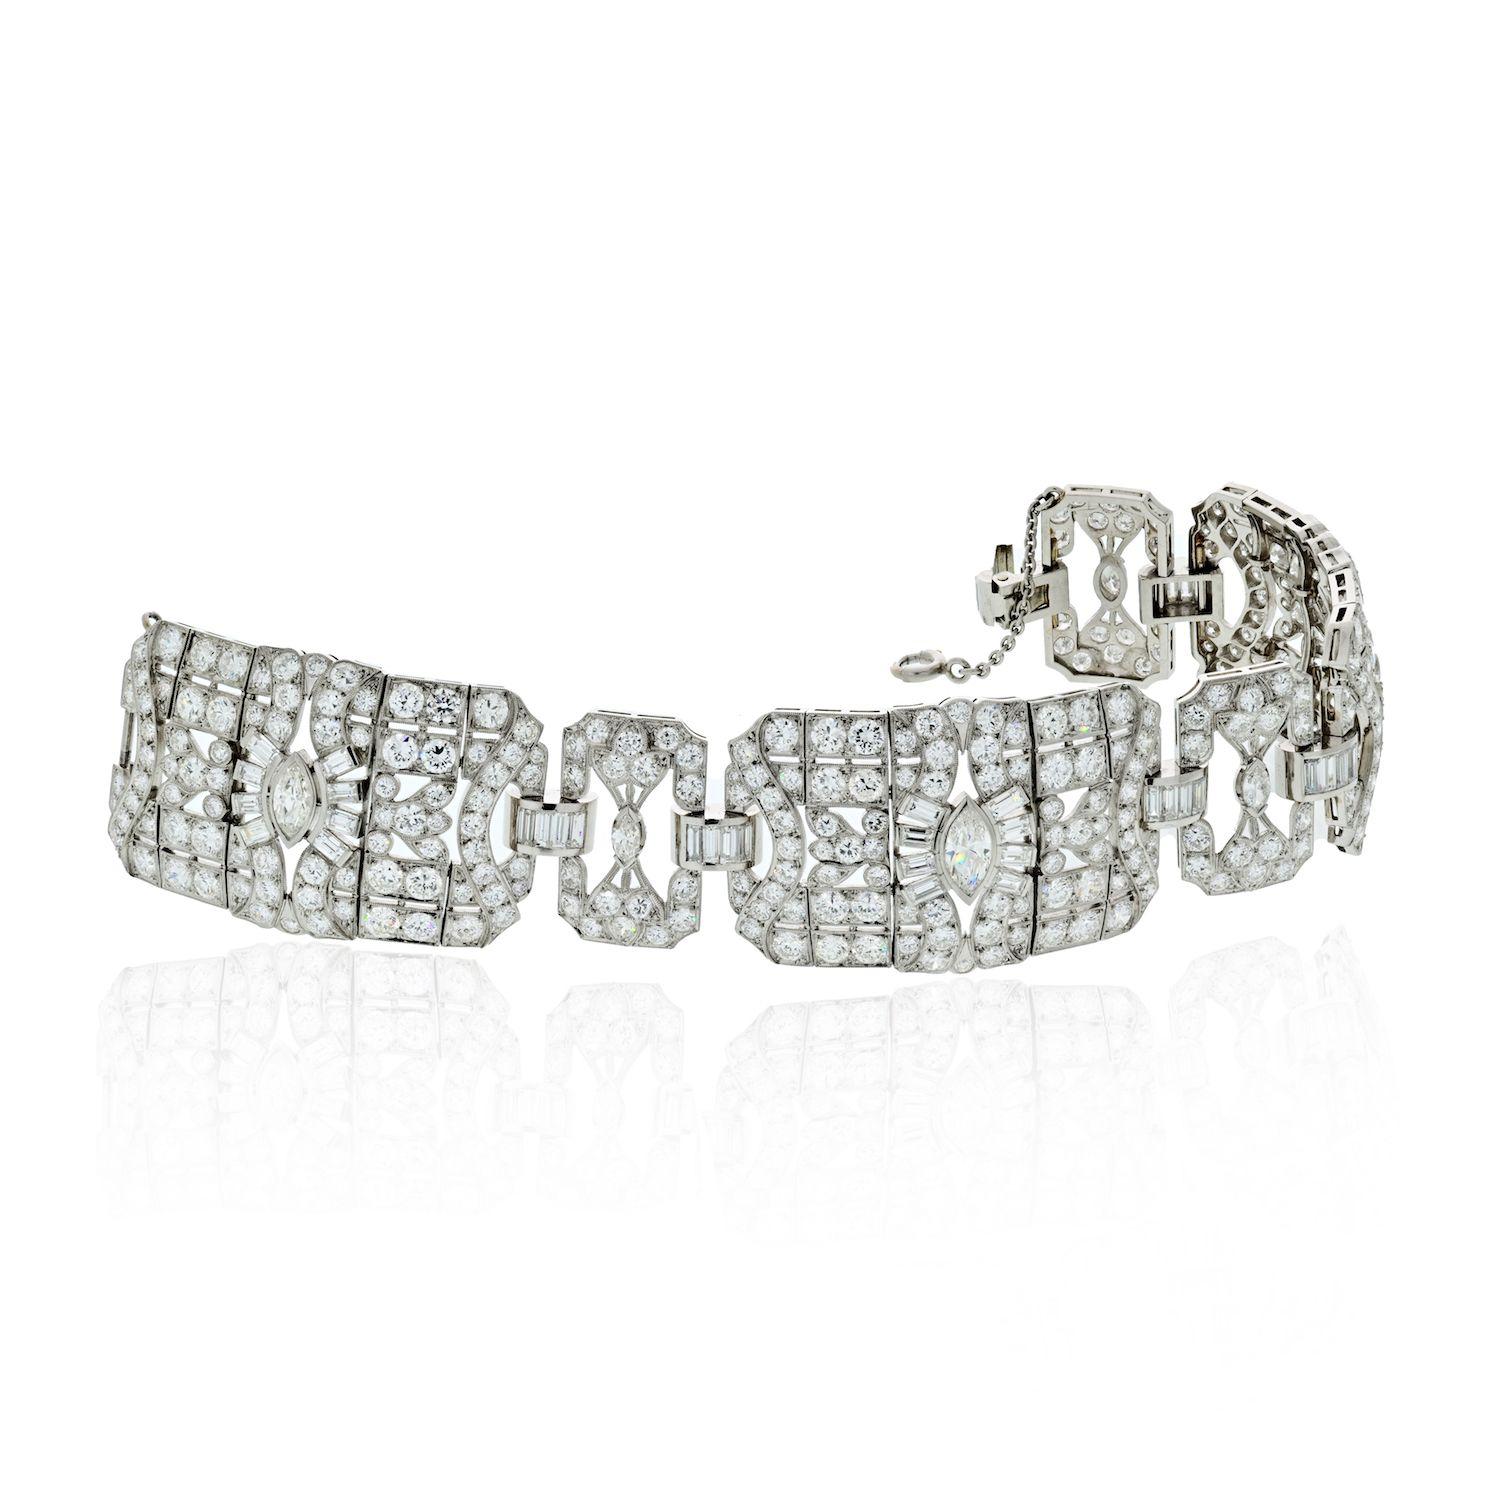 An incredible Art Deco bracelet features 30 carats of marquise, baguette, and single cut diamonds set in platinum for a detailed and artistic look. The marquise shaped diamonds anchor the piece with large open spaces and baguette-cut diamonds are